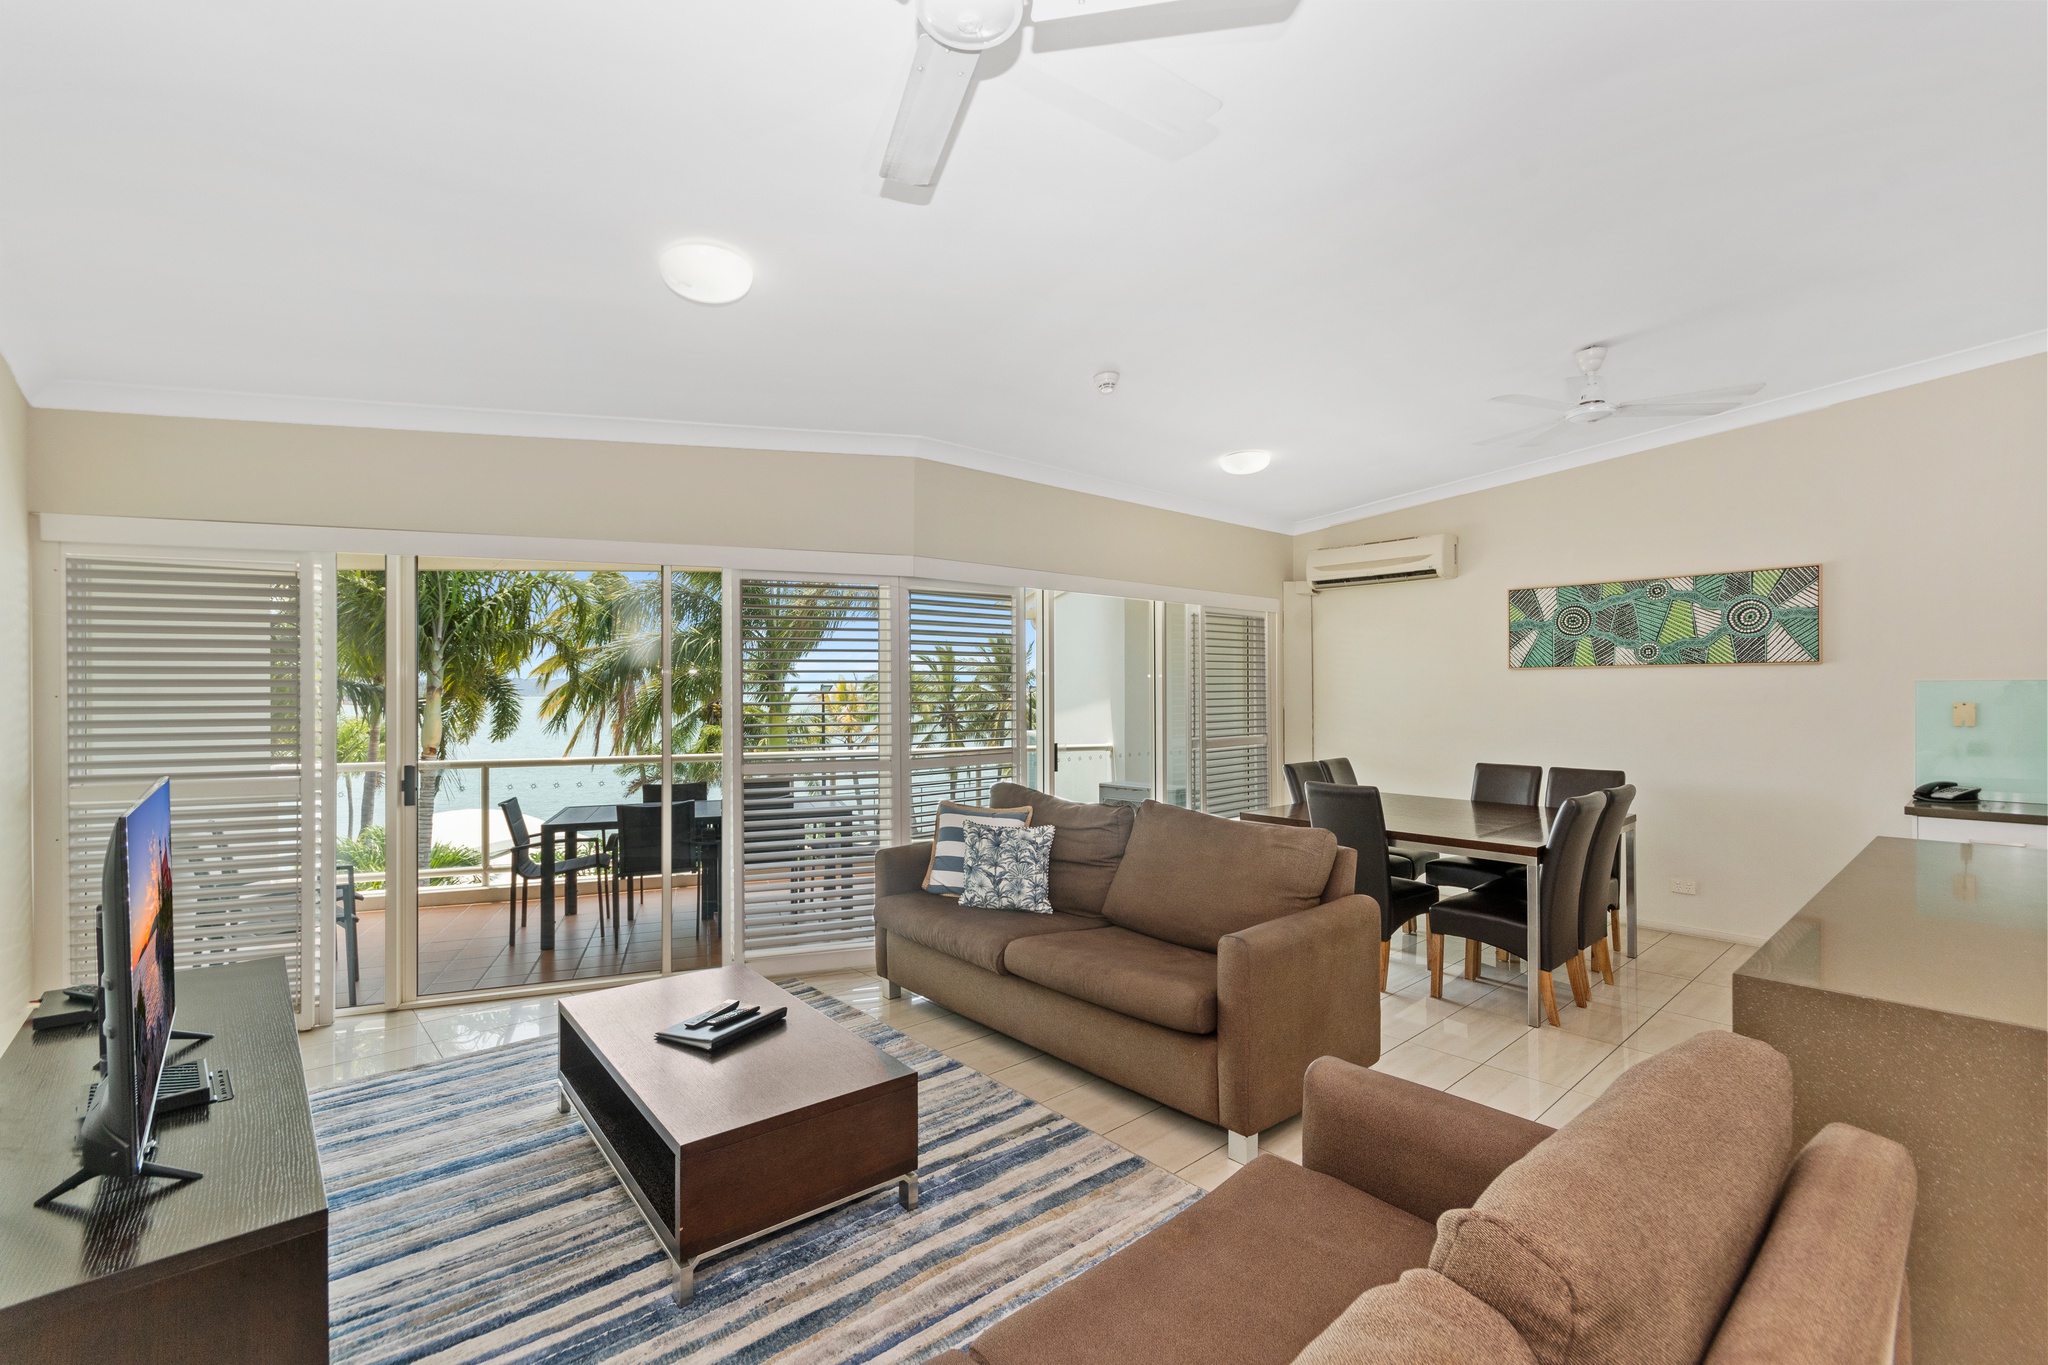 2 Bedroom Accommodation Townsville